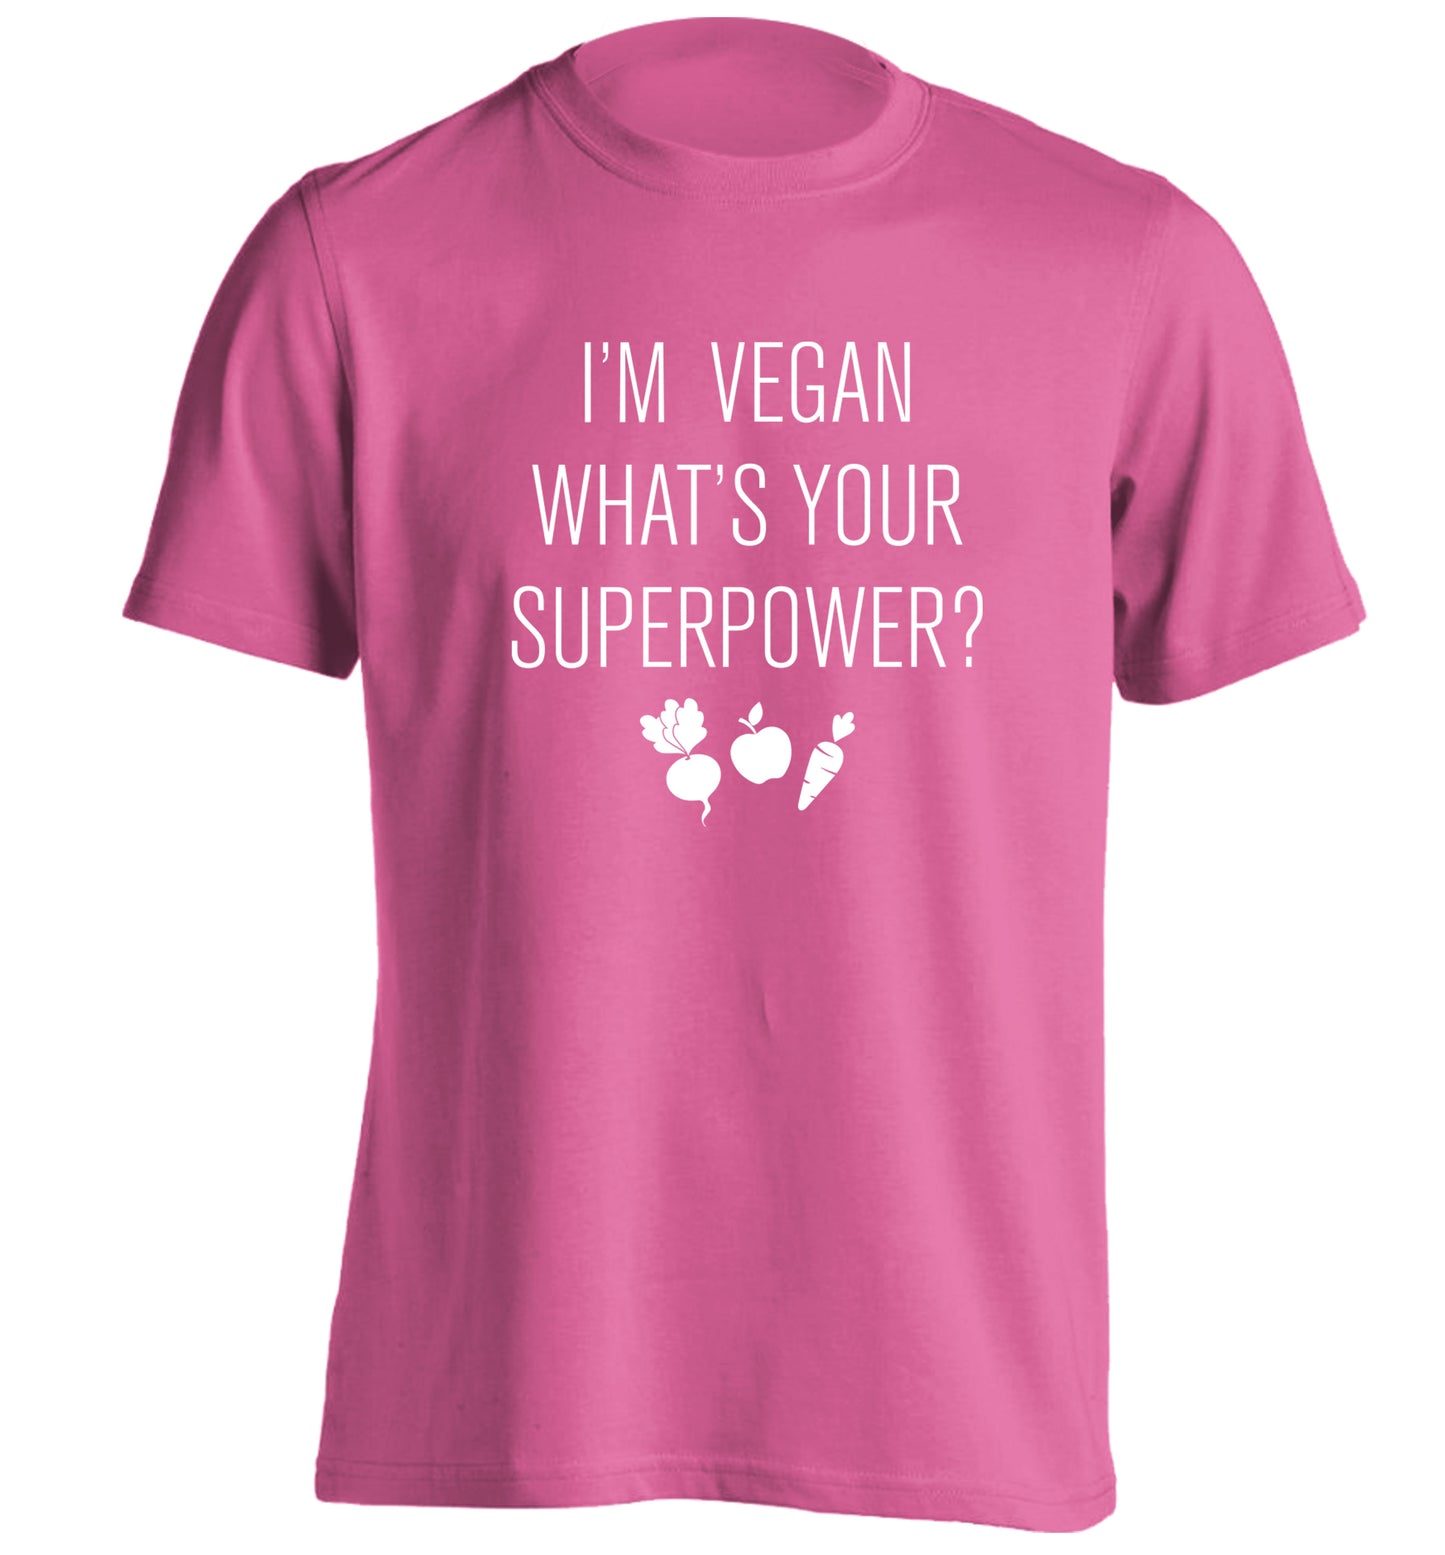 I'm Vegan What's Your Superpower? adults unisex pink Tshirt 2XL